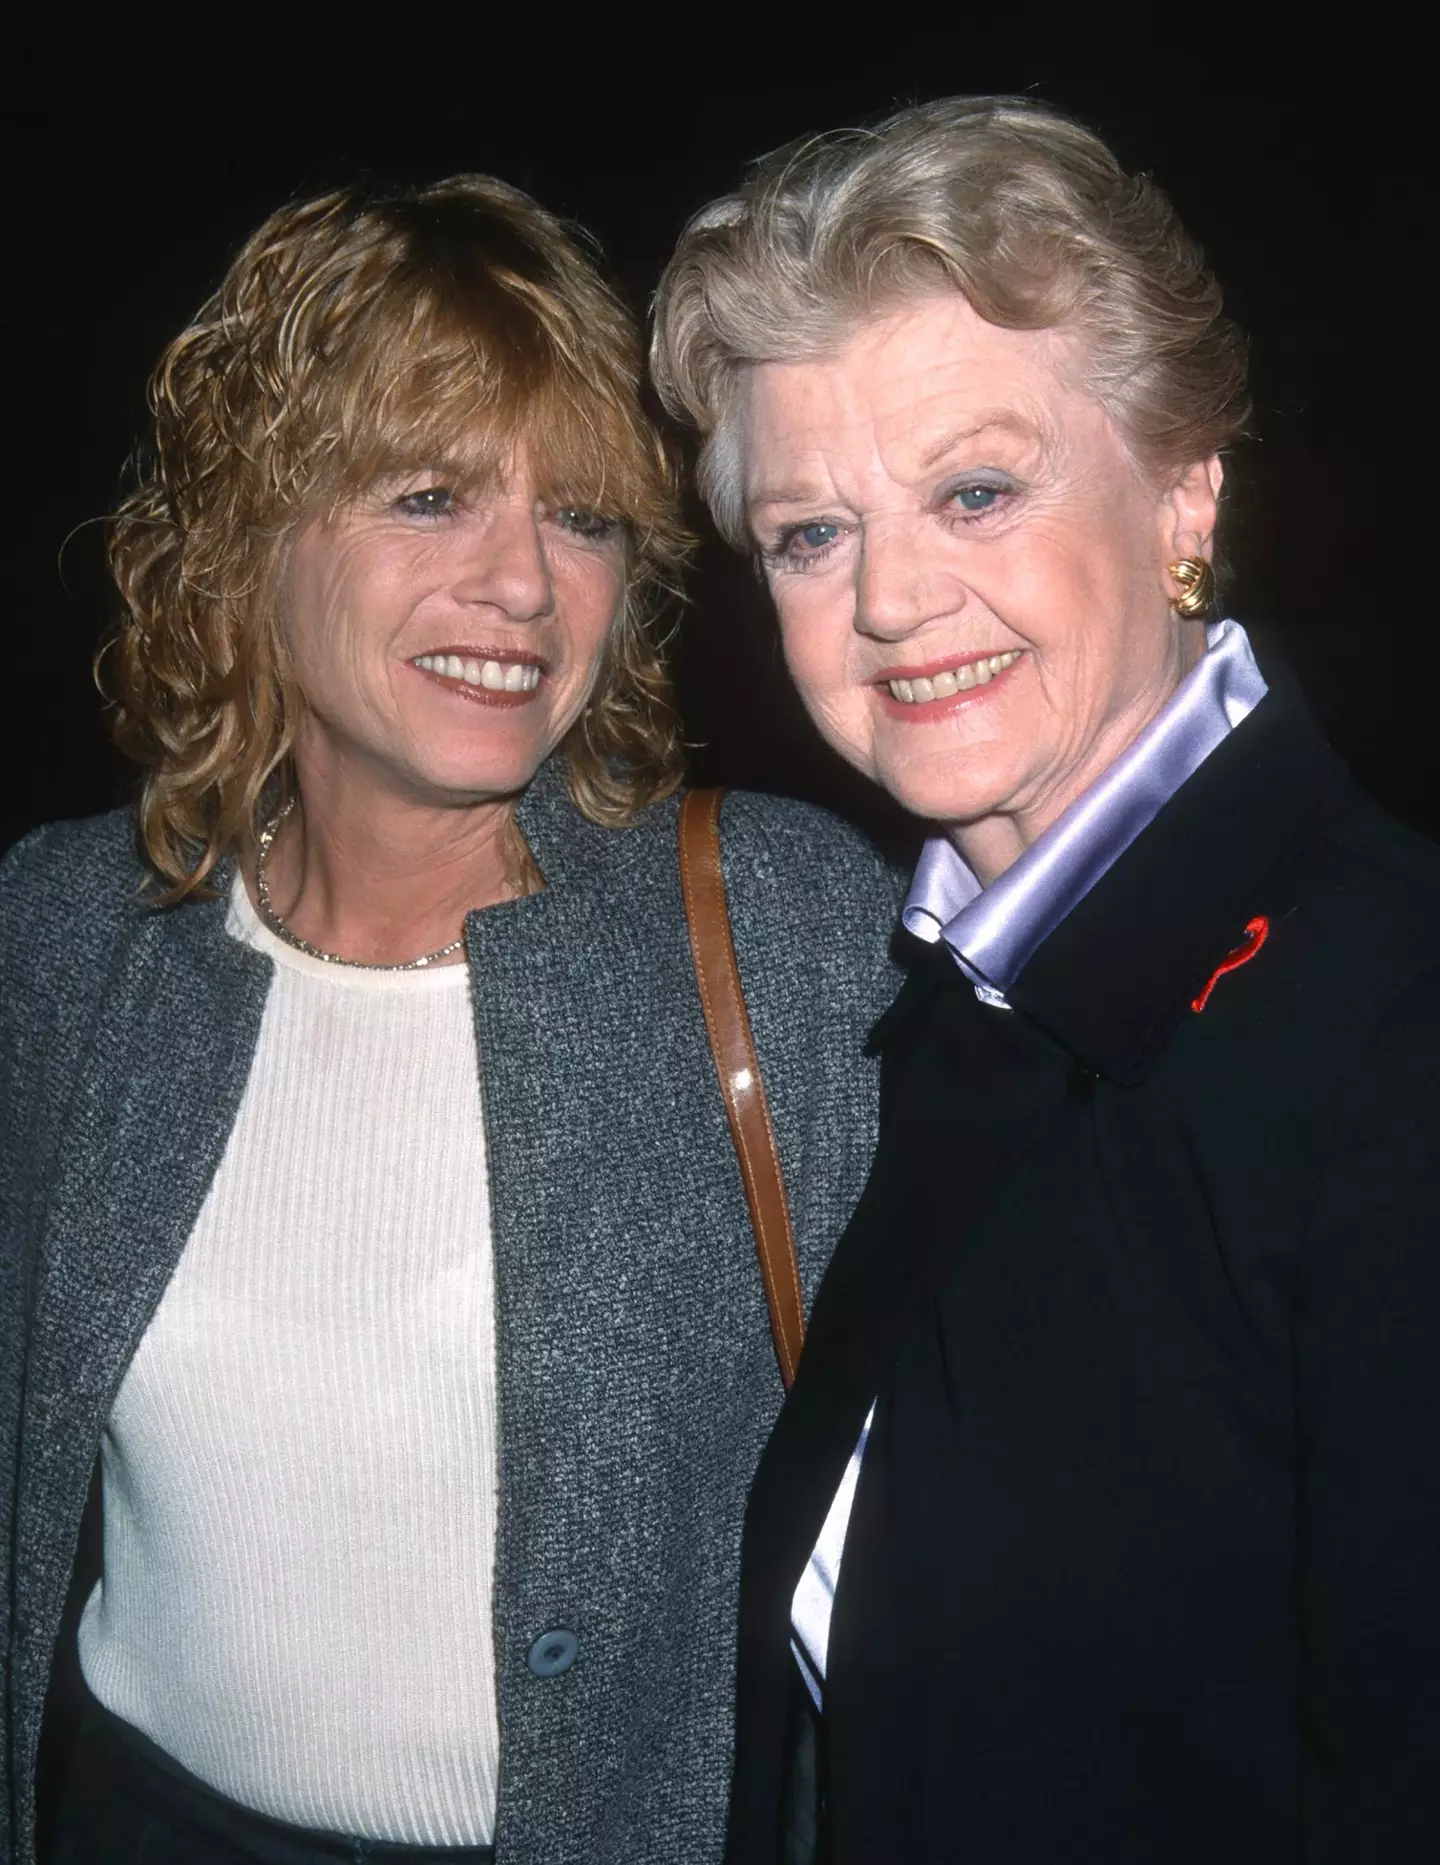 Angela Lansbury and daughter Deidre Angela Shaw pictured in 2000 (Ron Galella, Ltd./Ron Galella Collection via Getty Images)